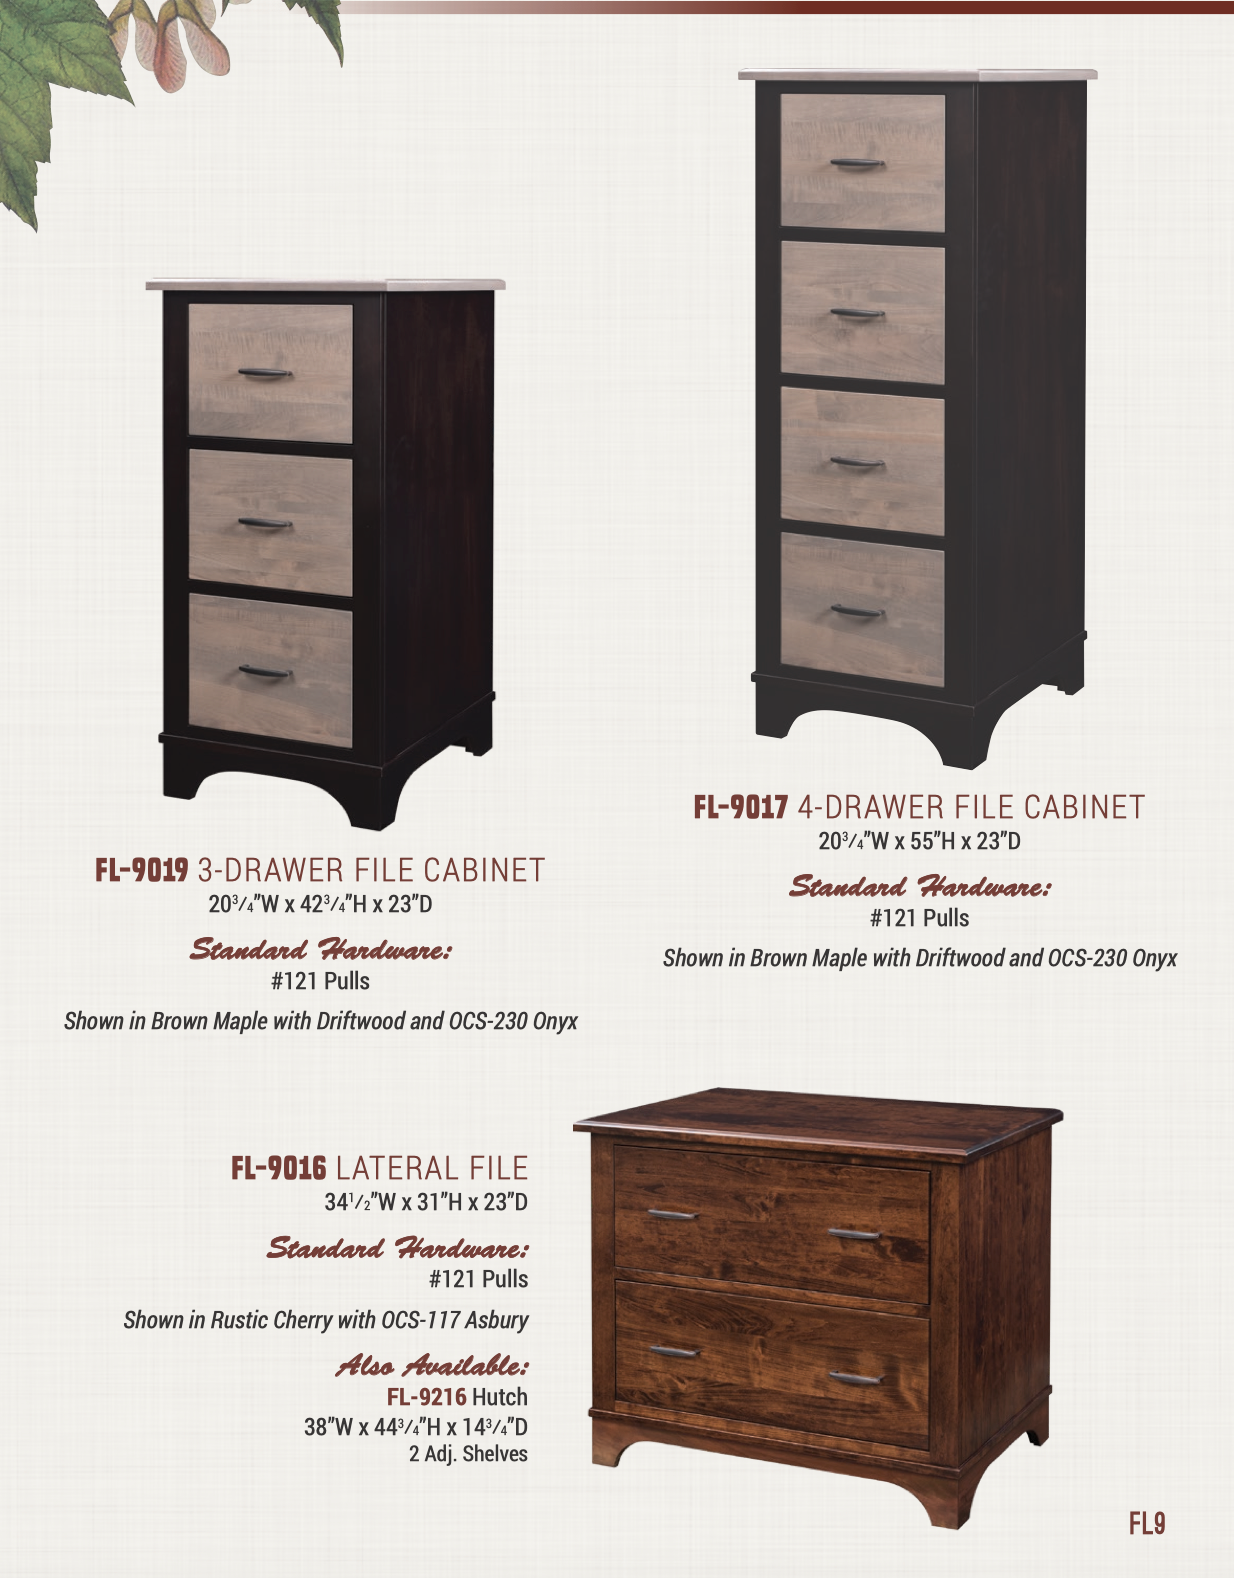 Finley Lateral File Cabinet